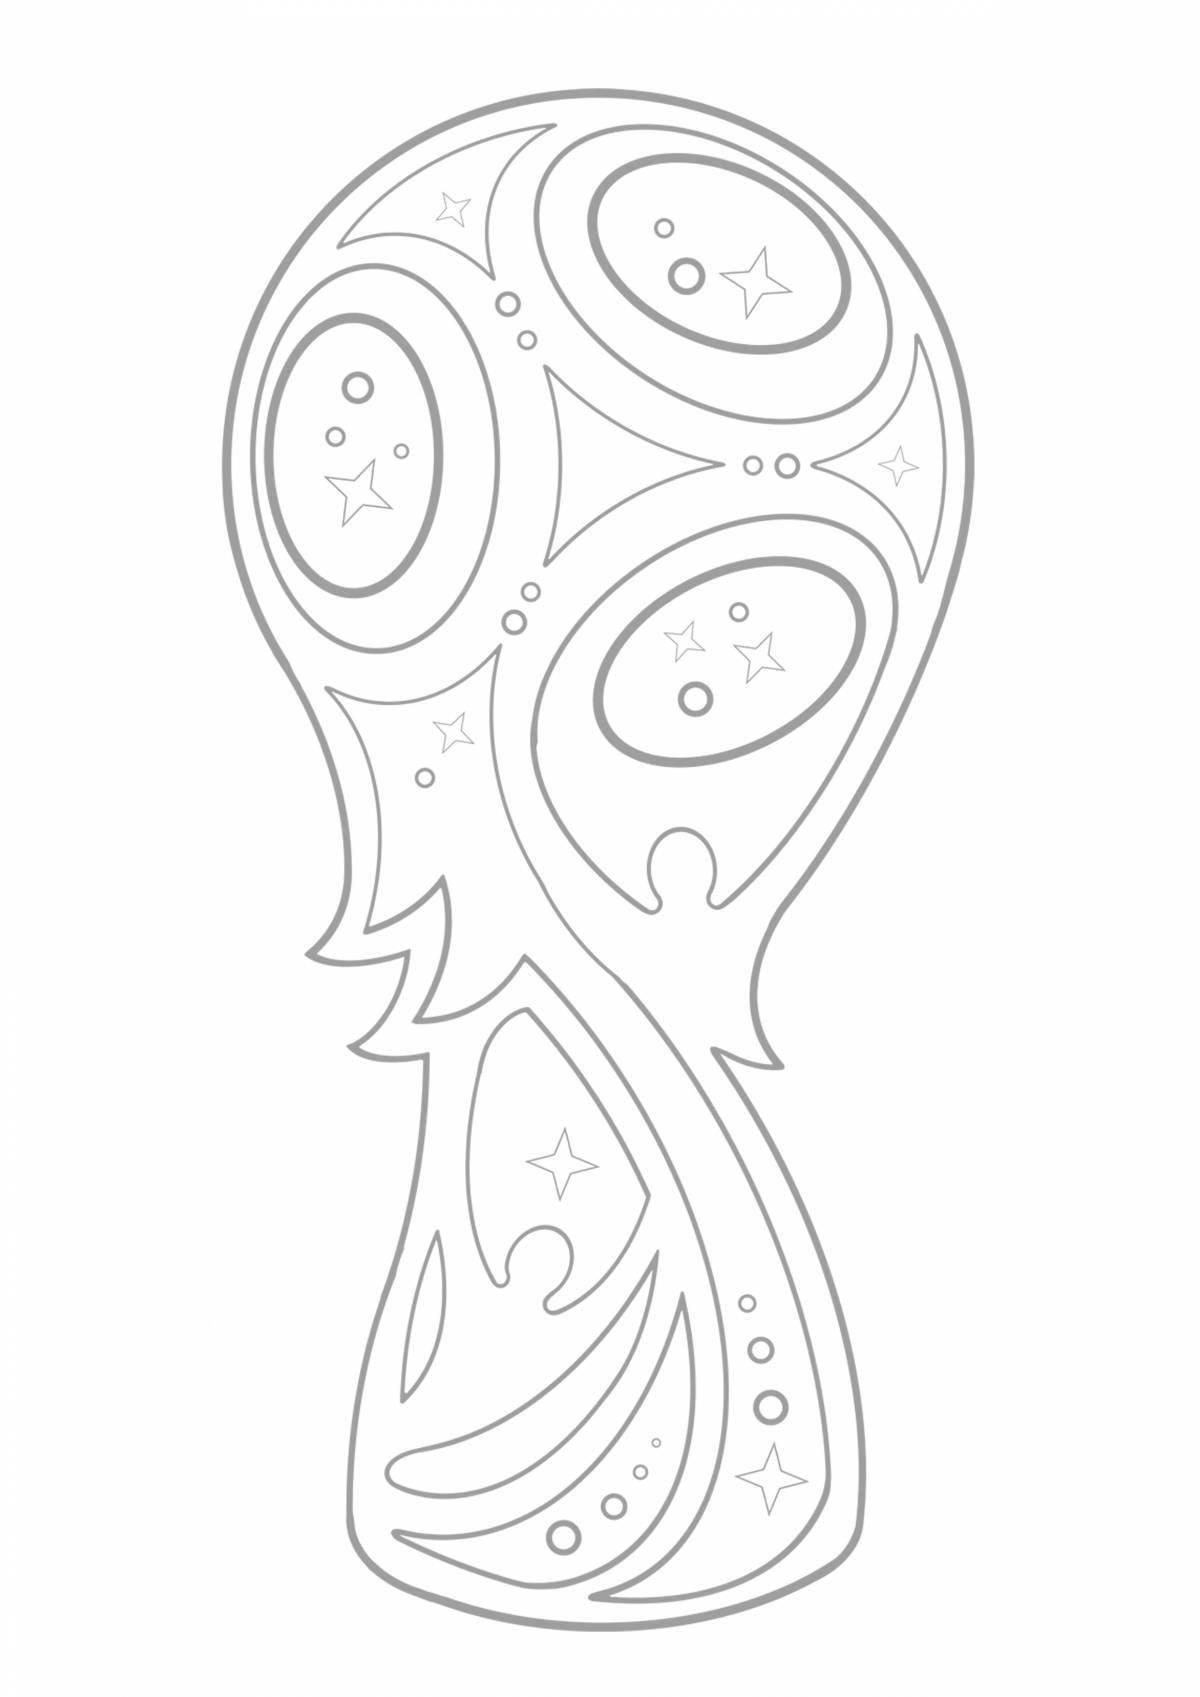 Coloring page great football cup